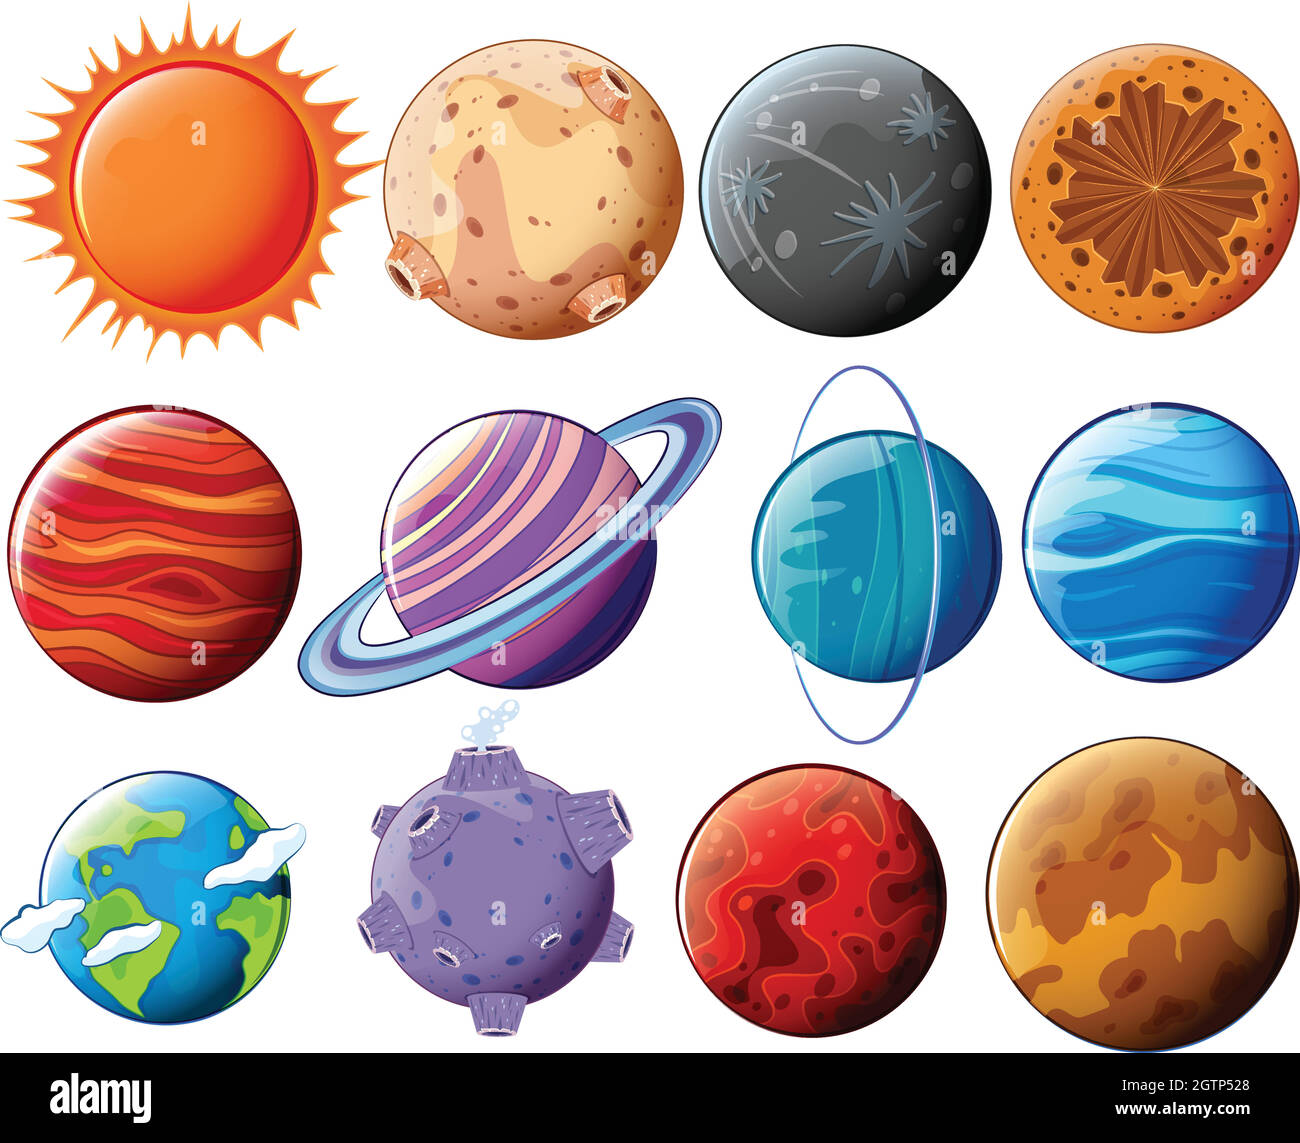 Set of planets and moons Stock Vector